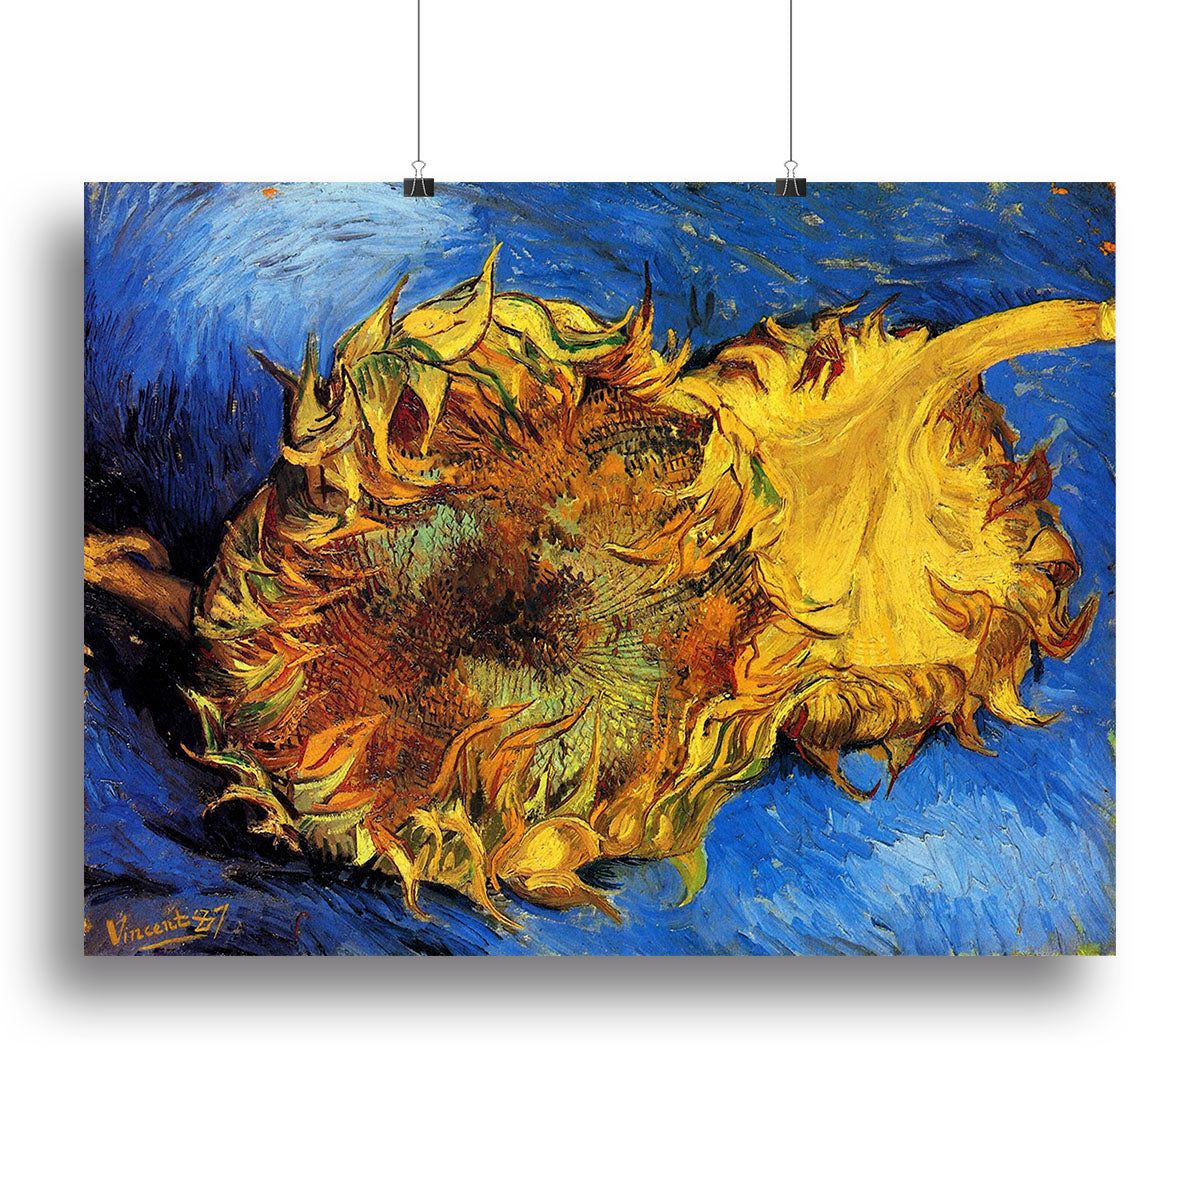 Two Cut Sunflowers 3 by Van Gogh Canvas Print or Poster - Canvas Art Rocks - 2